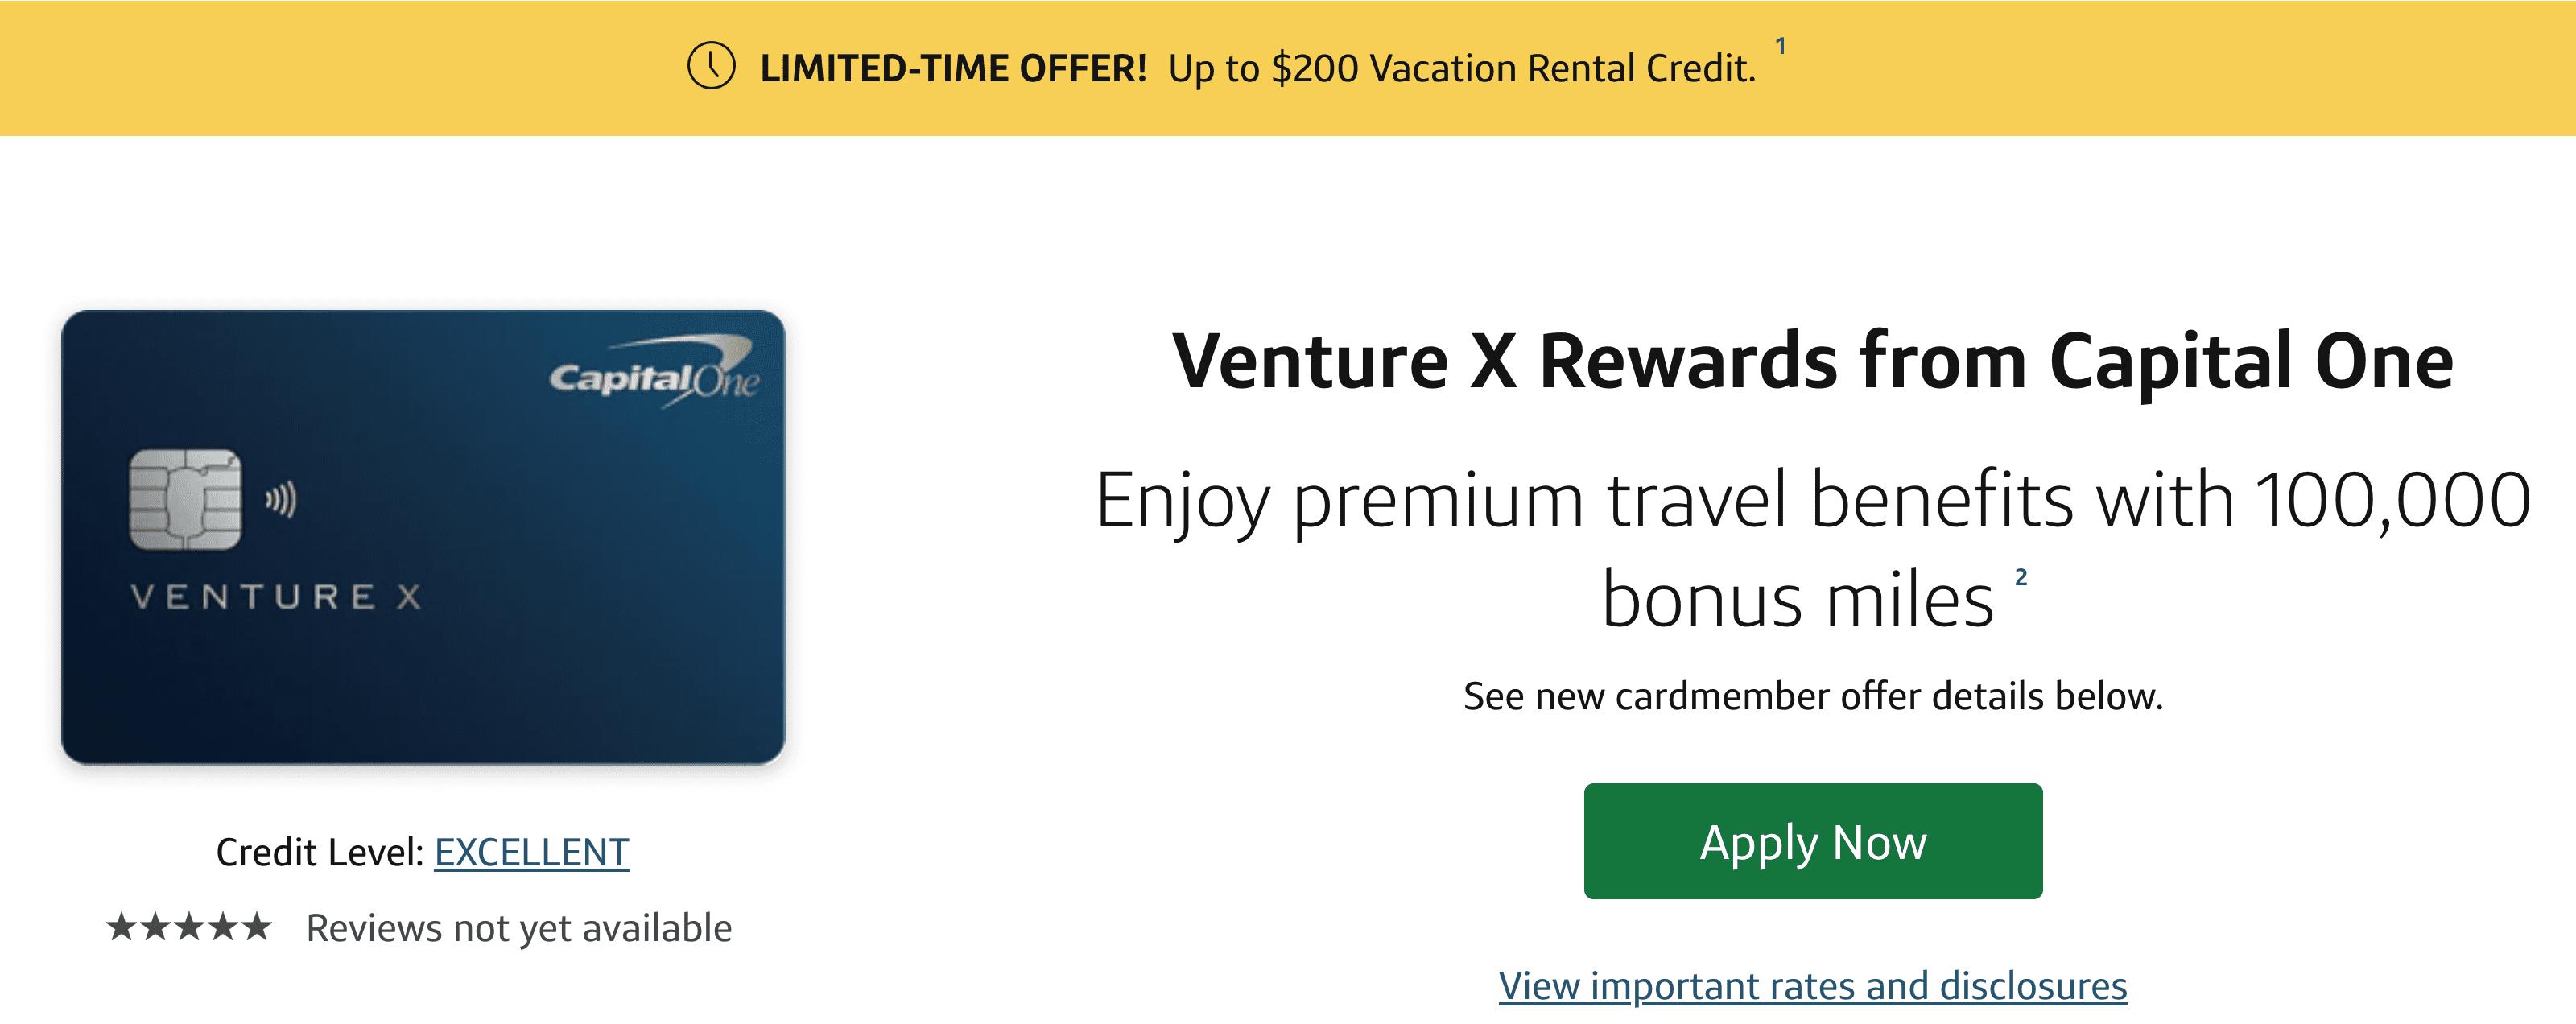 Capital One Makes Changes to Venture X $300 Travel Credit